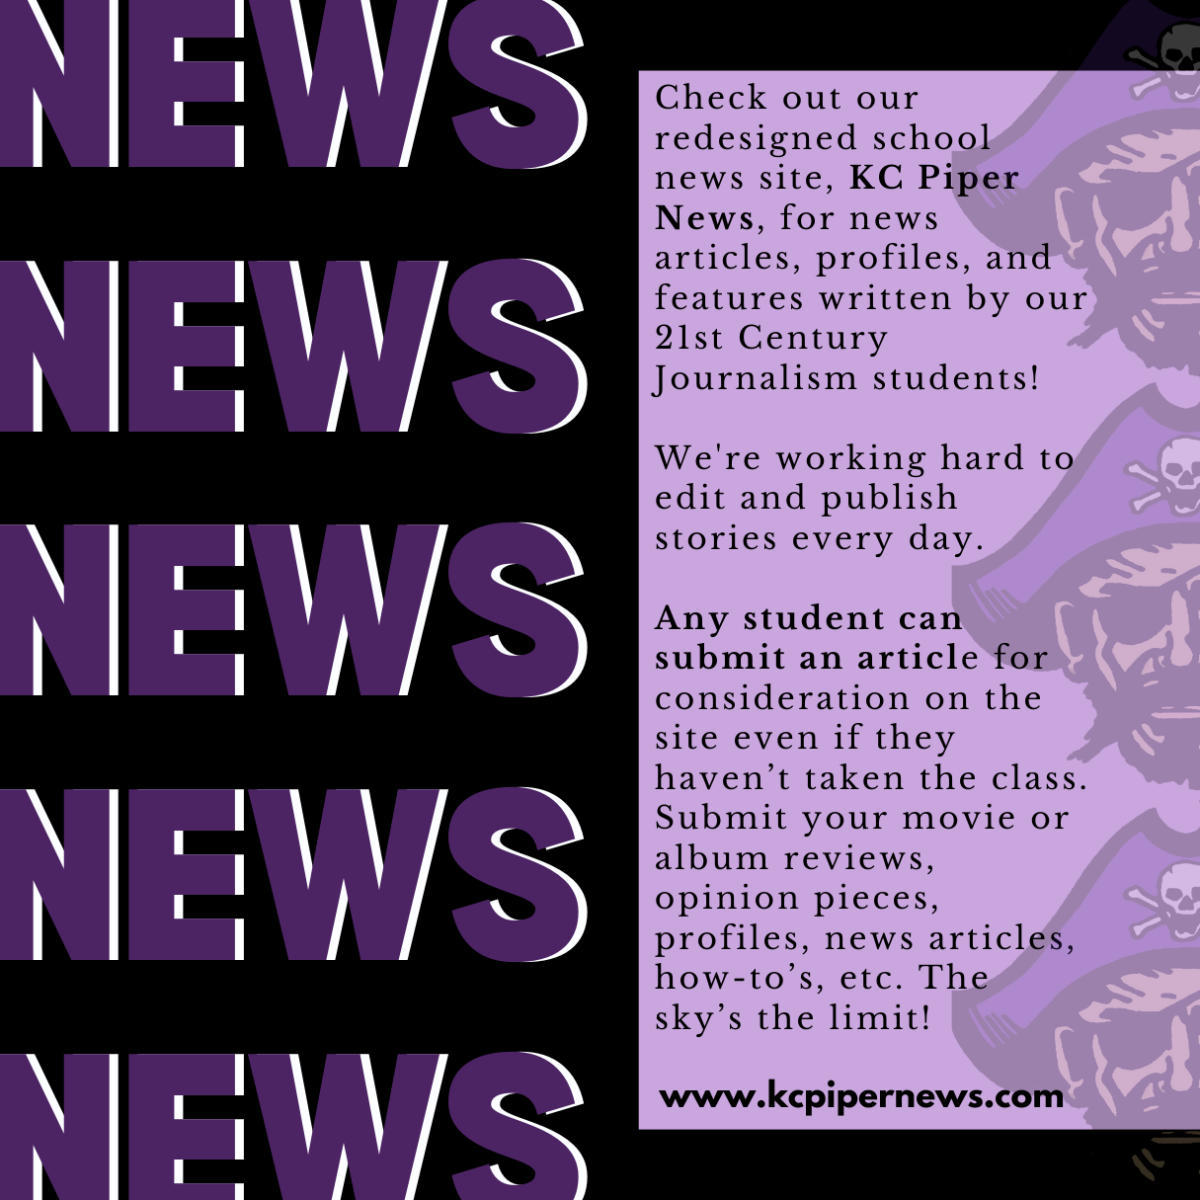 Pipers news site relaunches